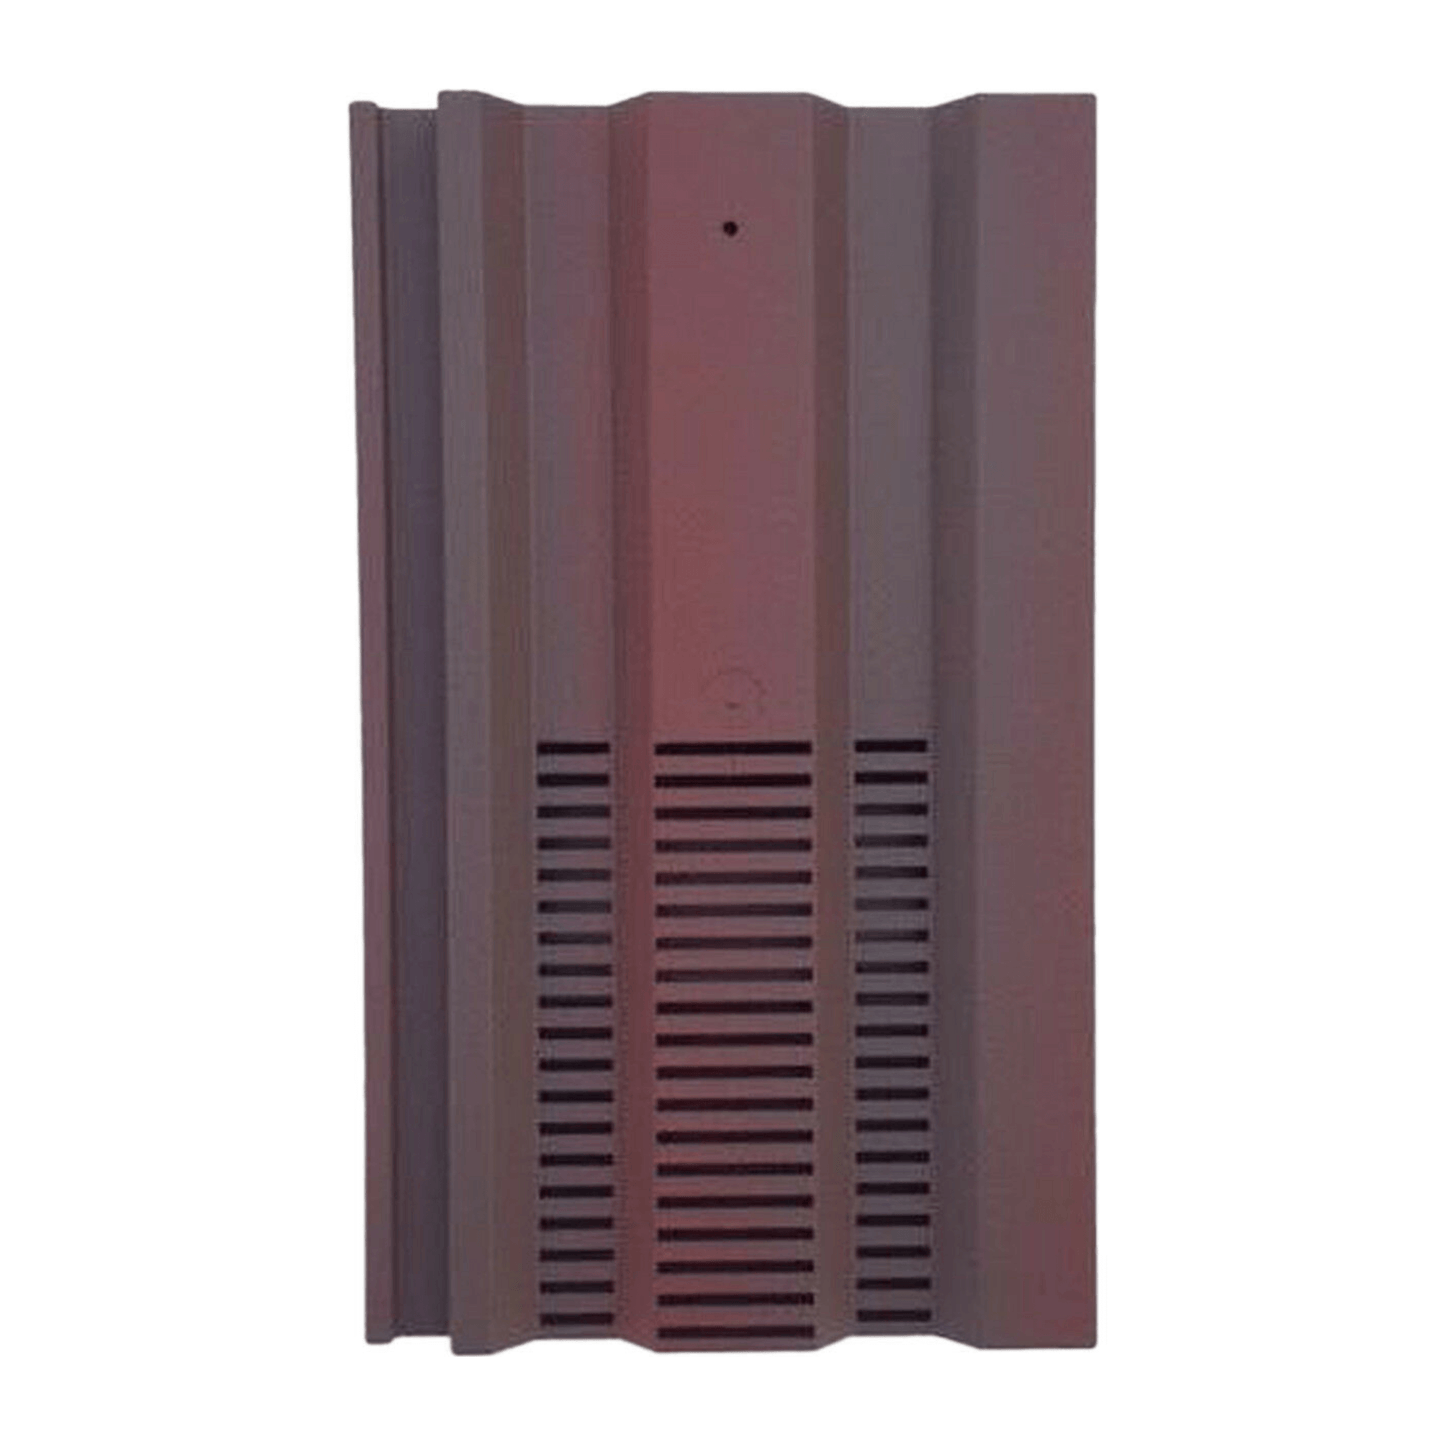 Redland 49 Vent Tile Breckland Brown Smooth - Beddoes Products